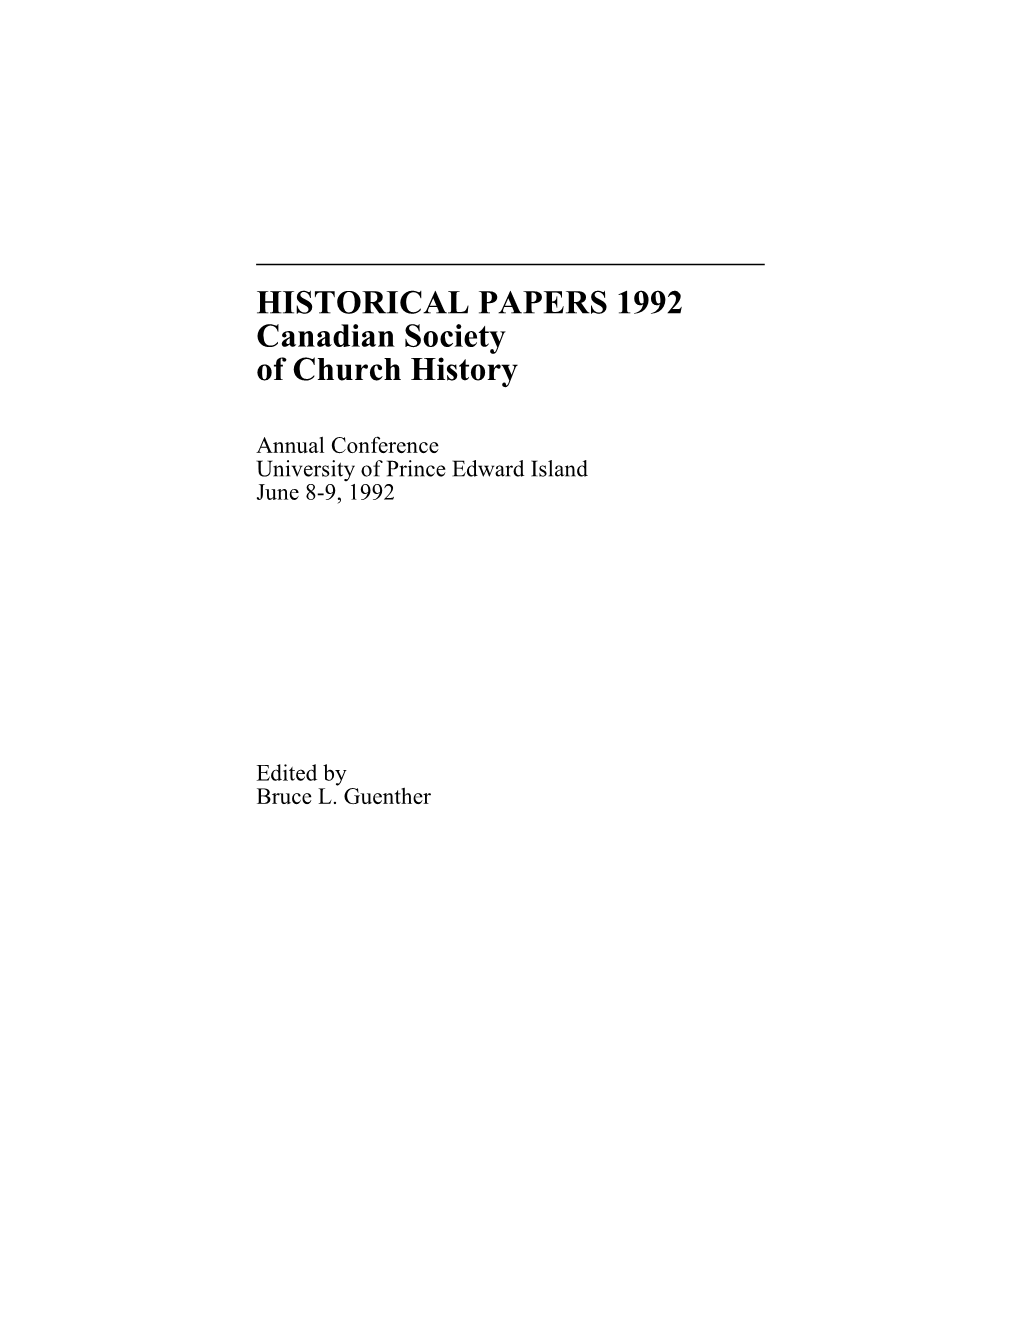 HISTORICAL PAPERS 1992 Canadian Society of Church History